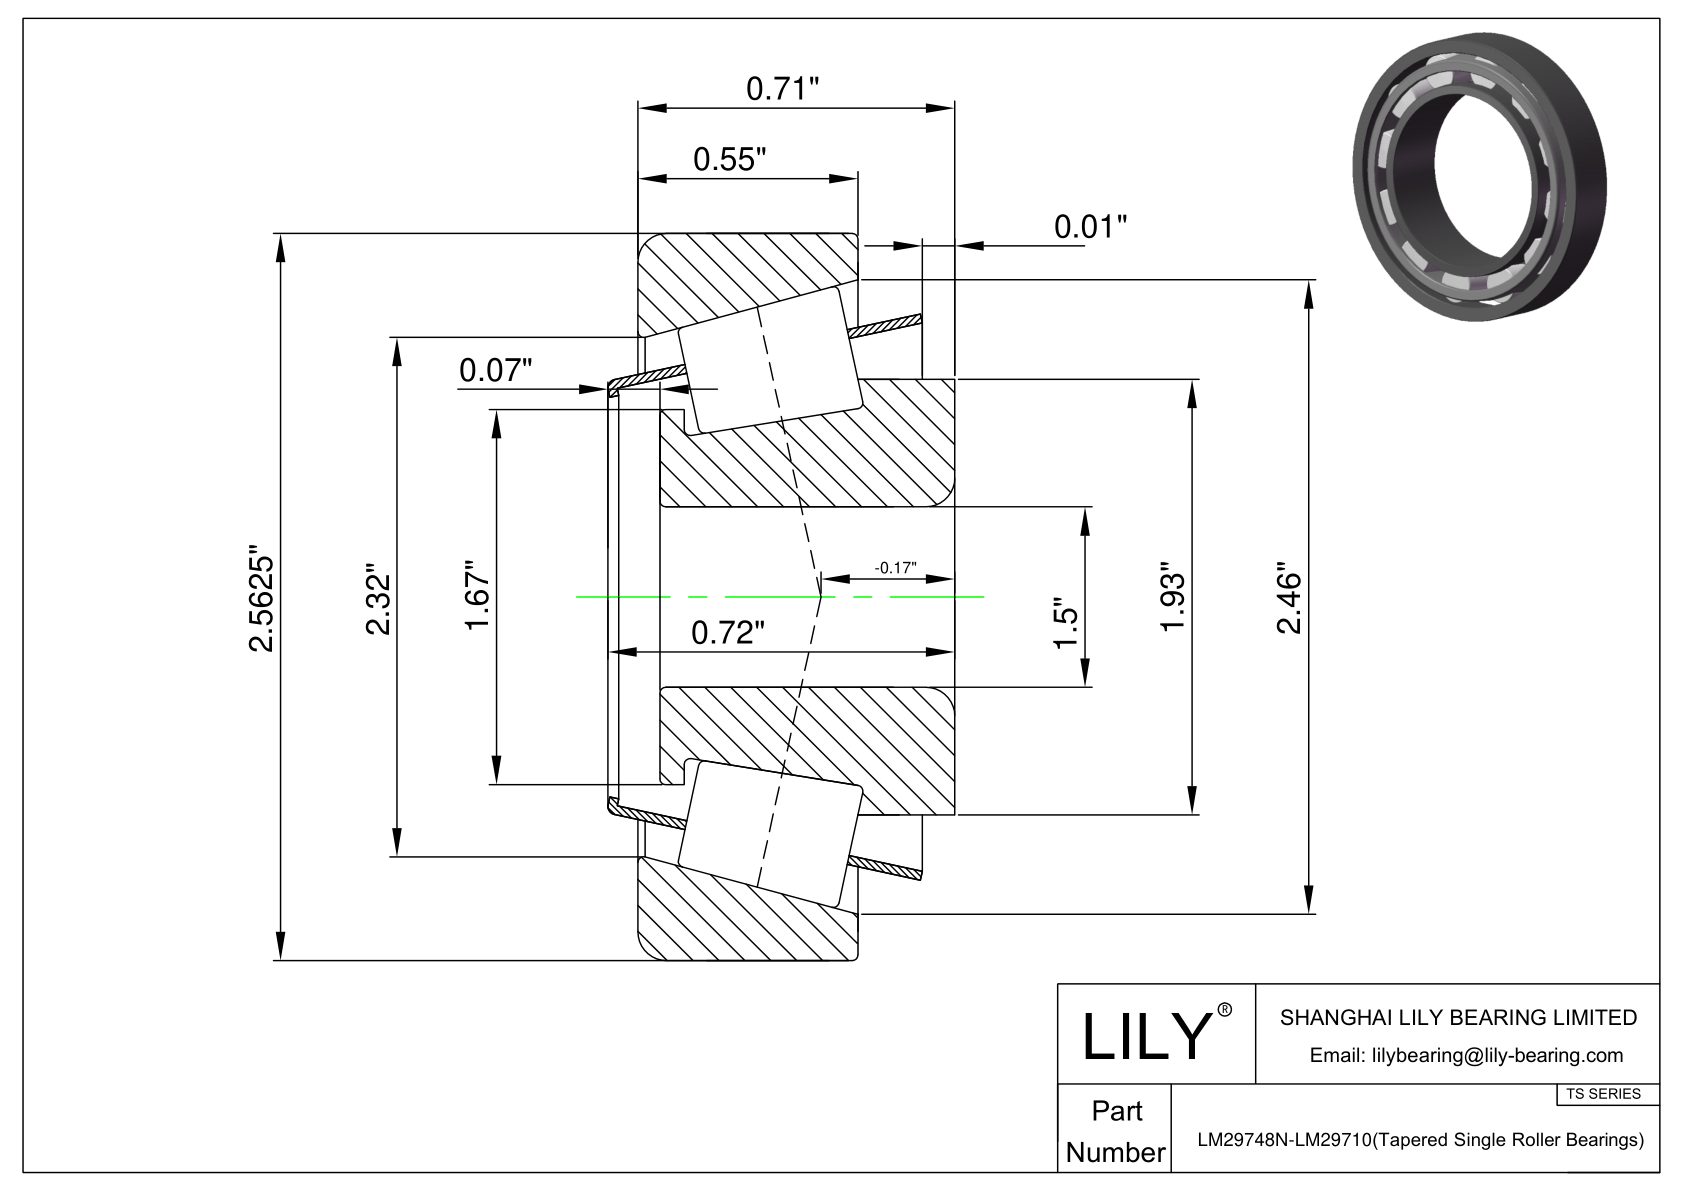 LM29748N-LM29710 TS (Tapered Single Roller Bearings) (Imperial) cad drawing